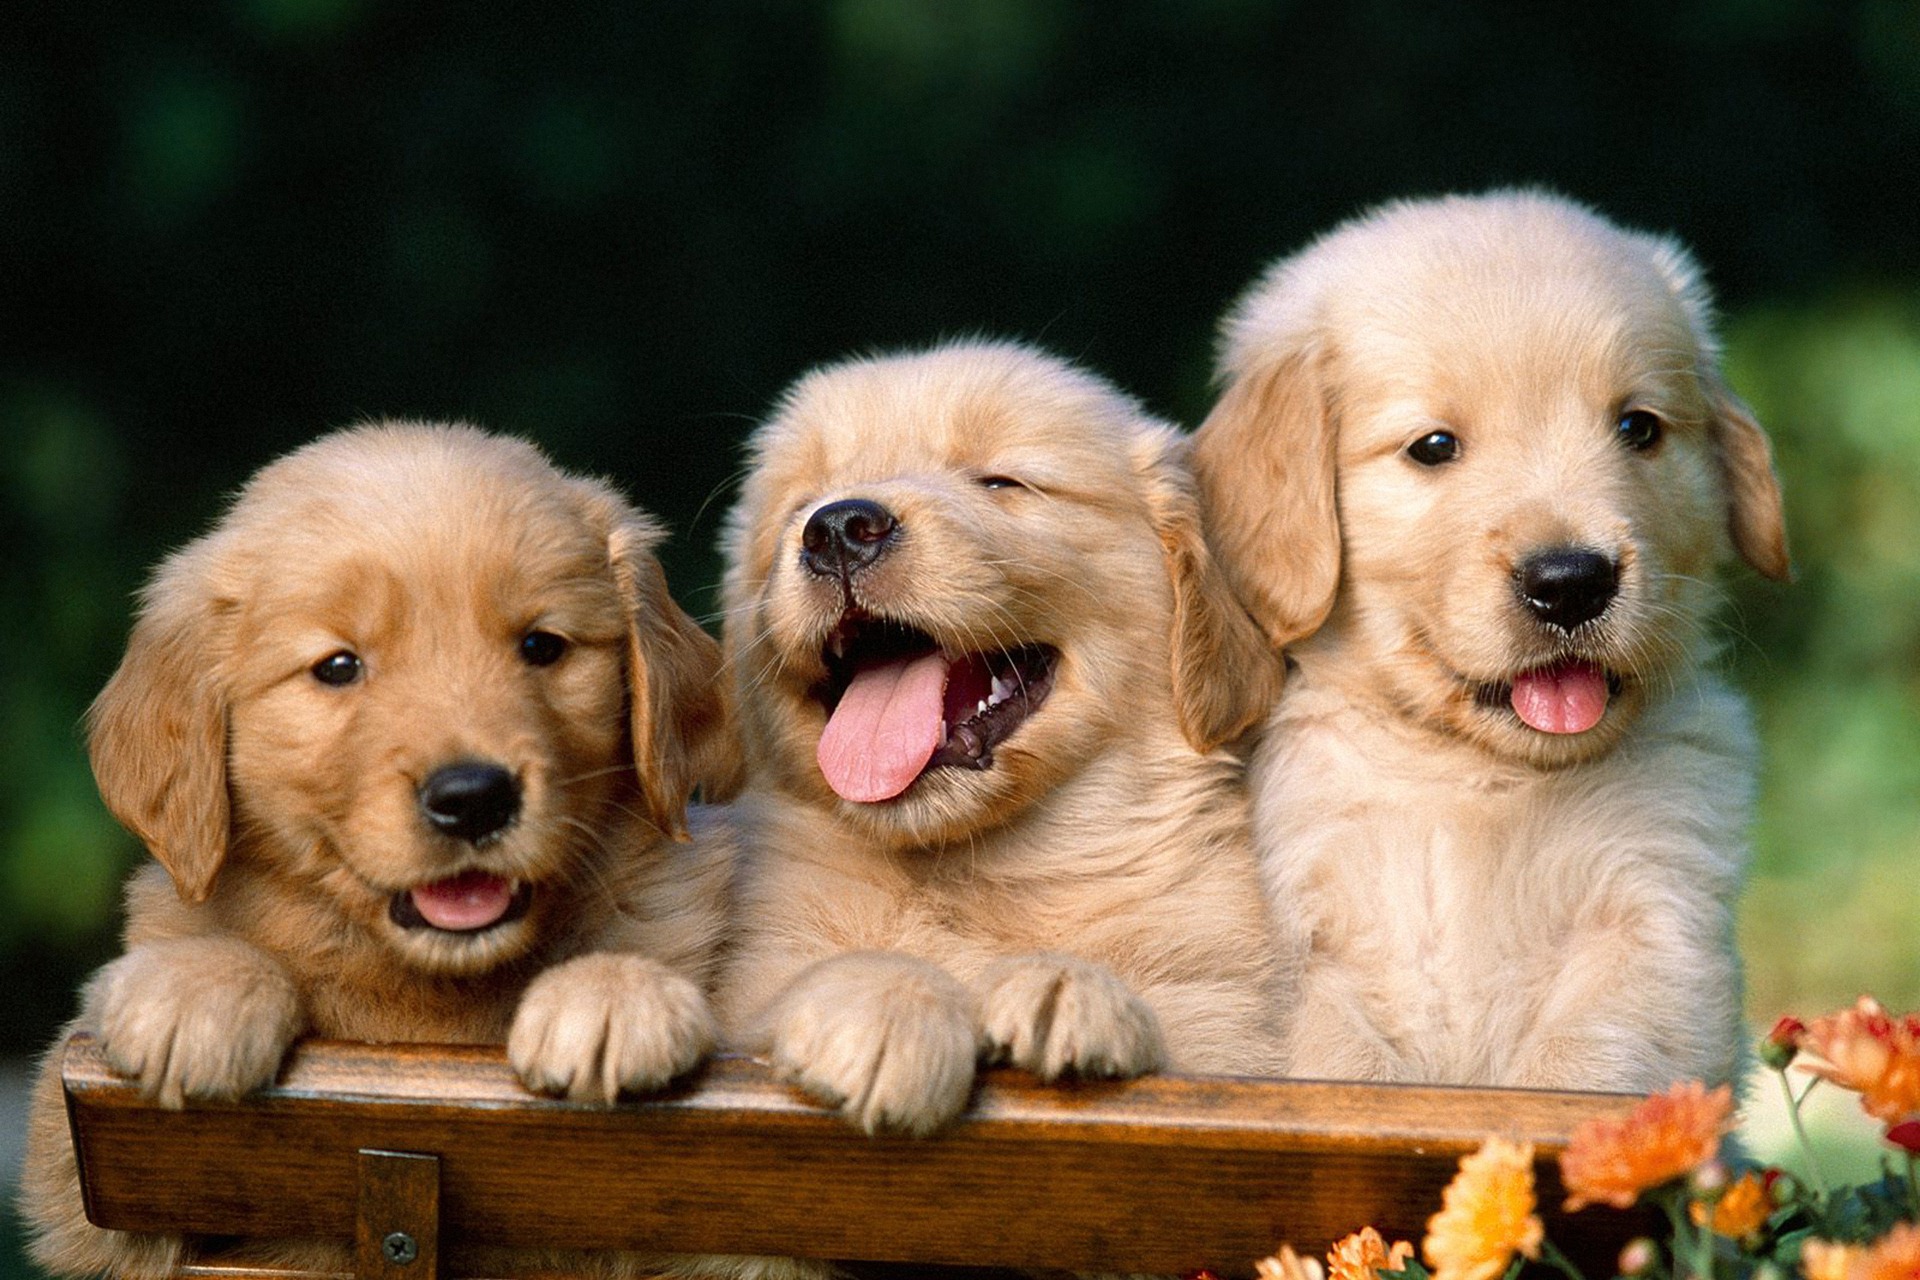 Cute puppies wallpapers hd